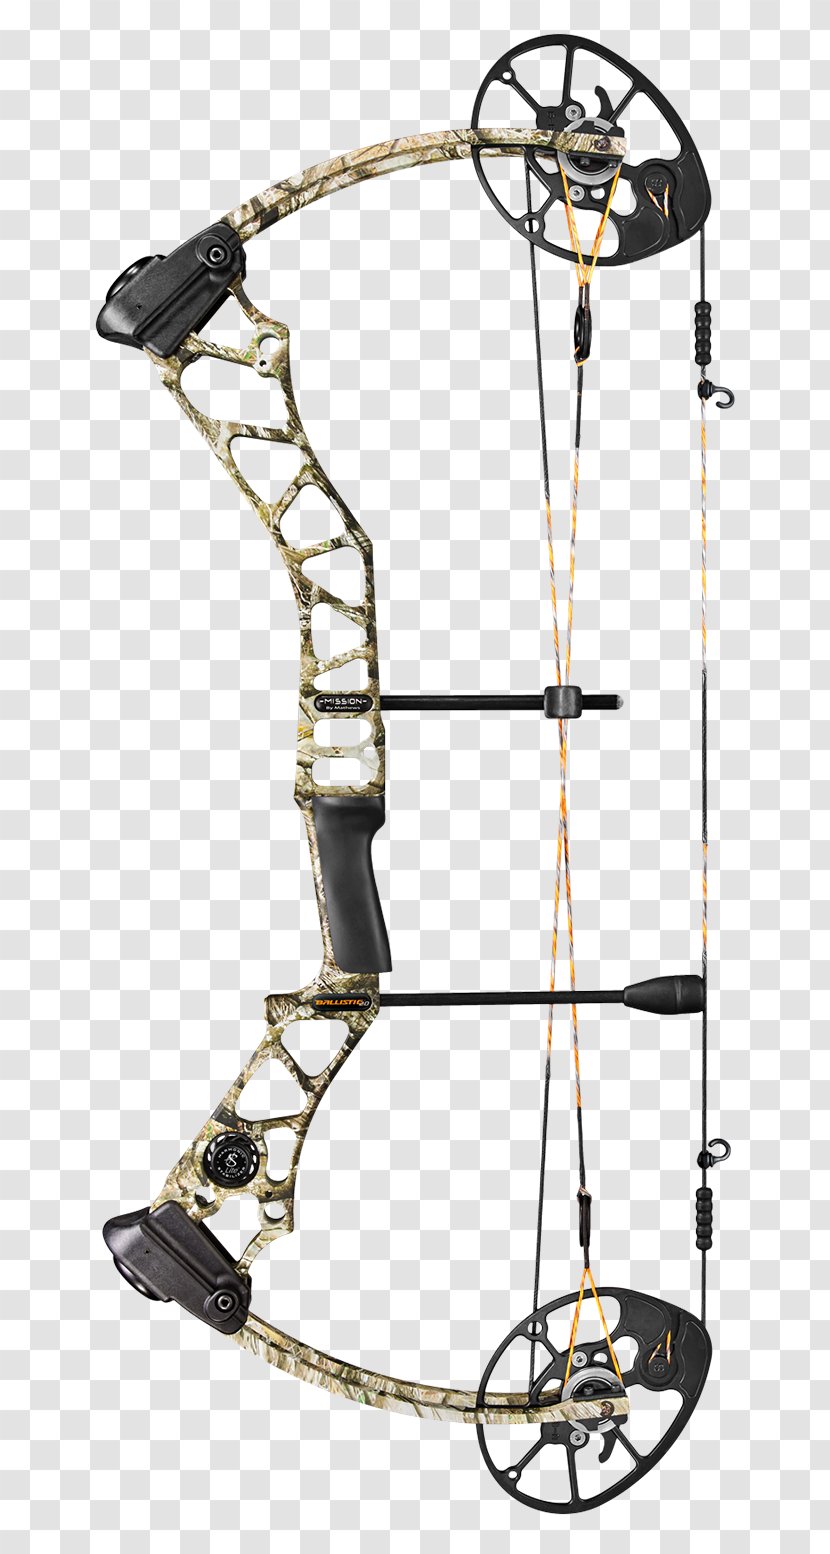 Compound Bows Archery Bow And Arrow Price Hunting - Weapon Transparent PNG